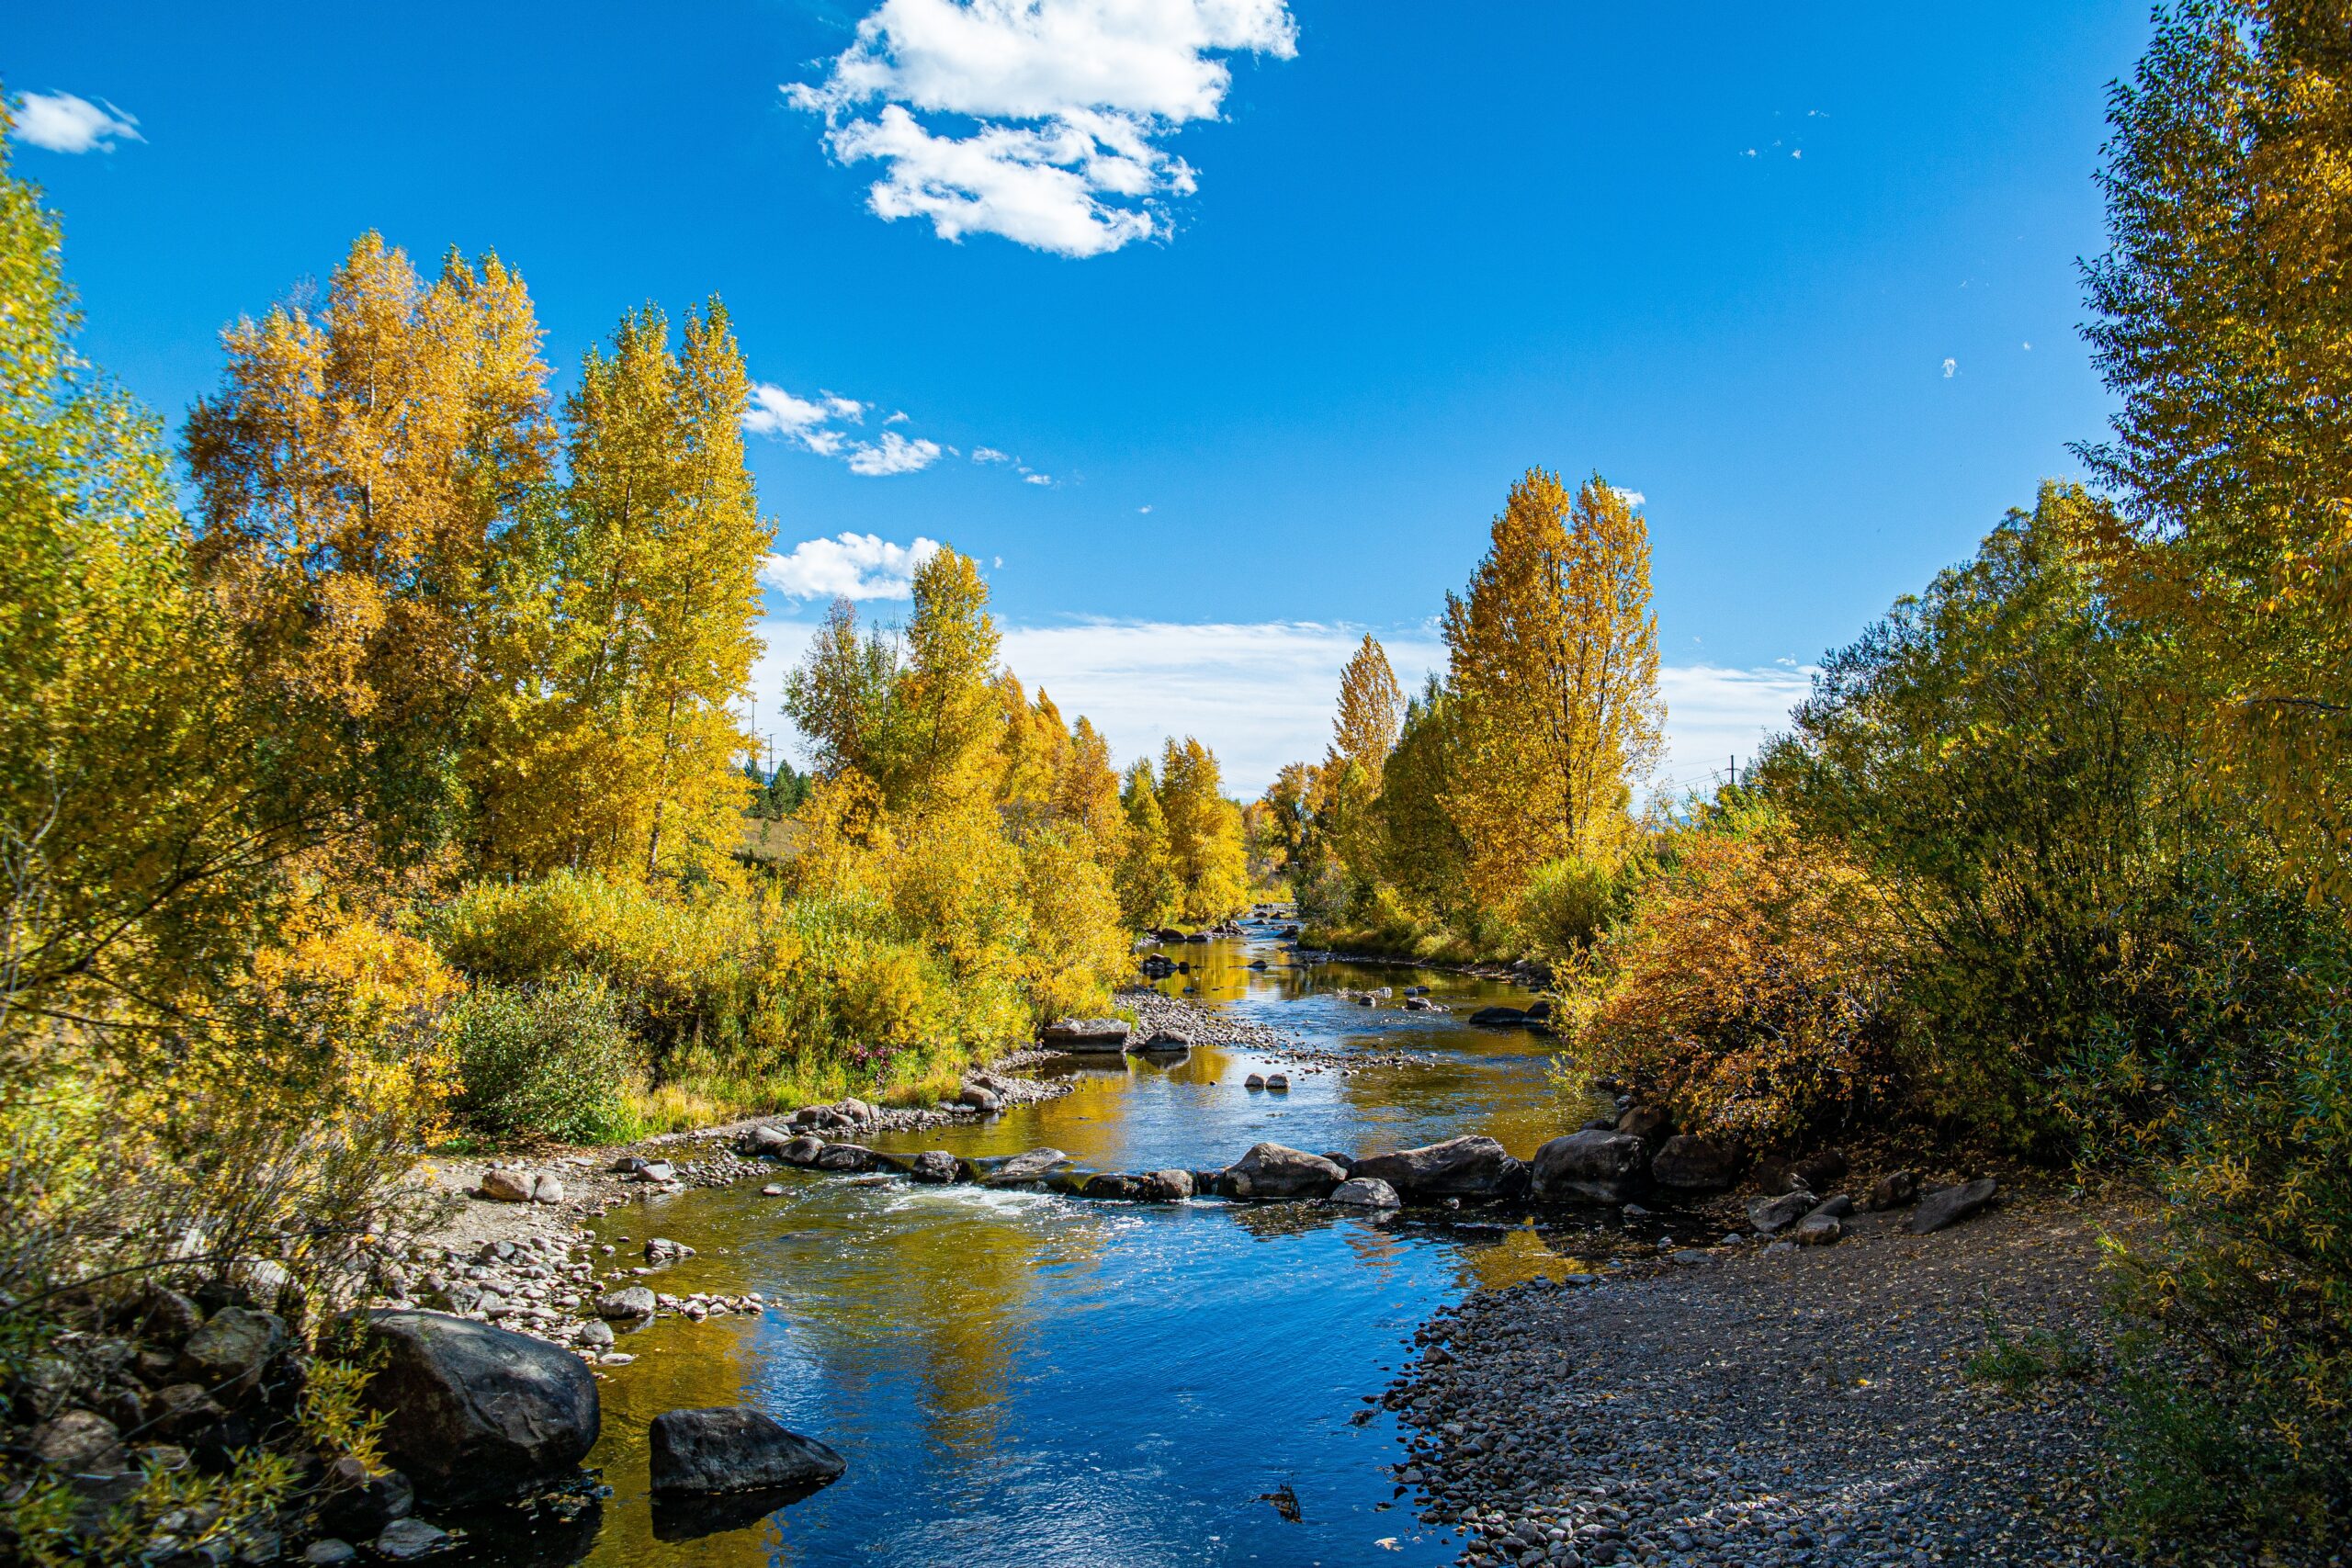 The Yampa River, framed by yellow trees in the fall